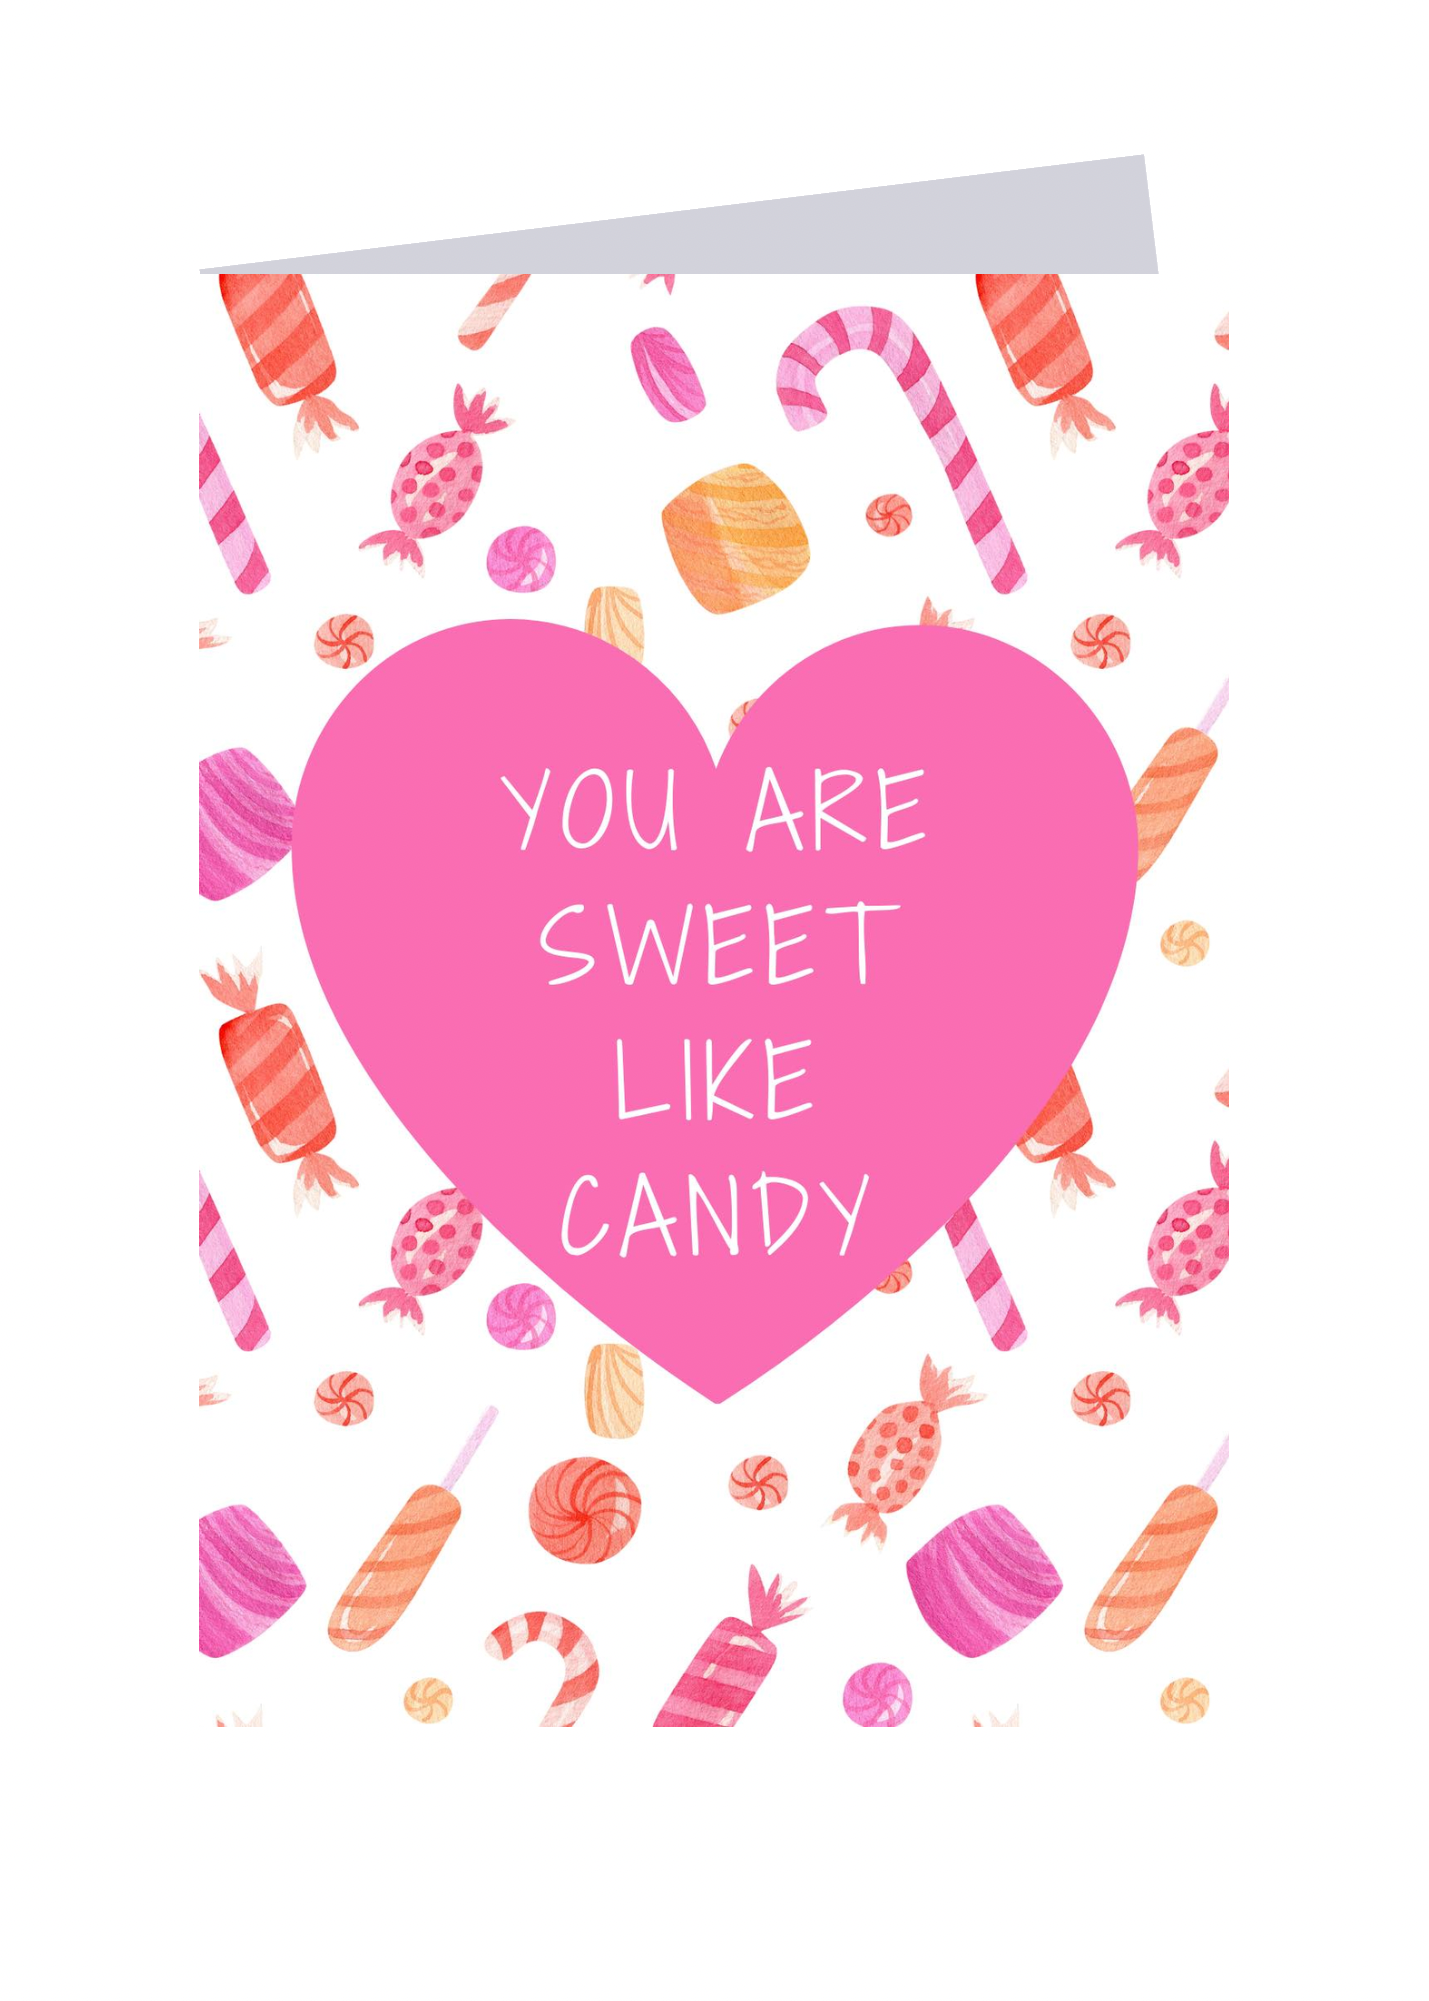 You are sweet like candy!